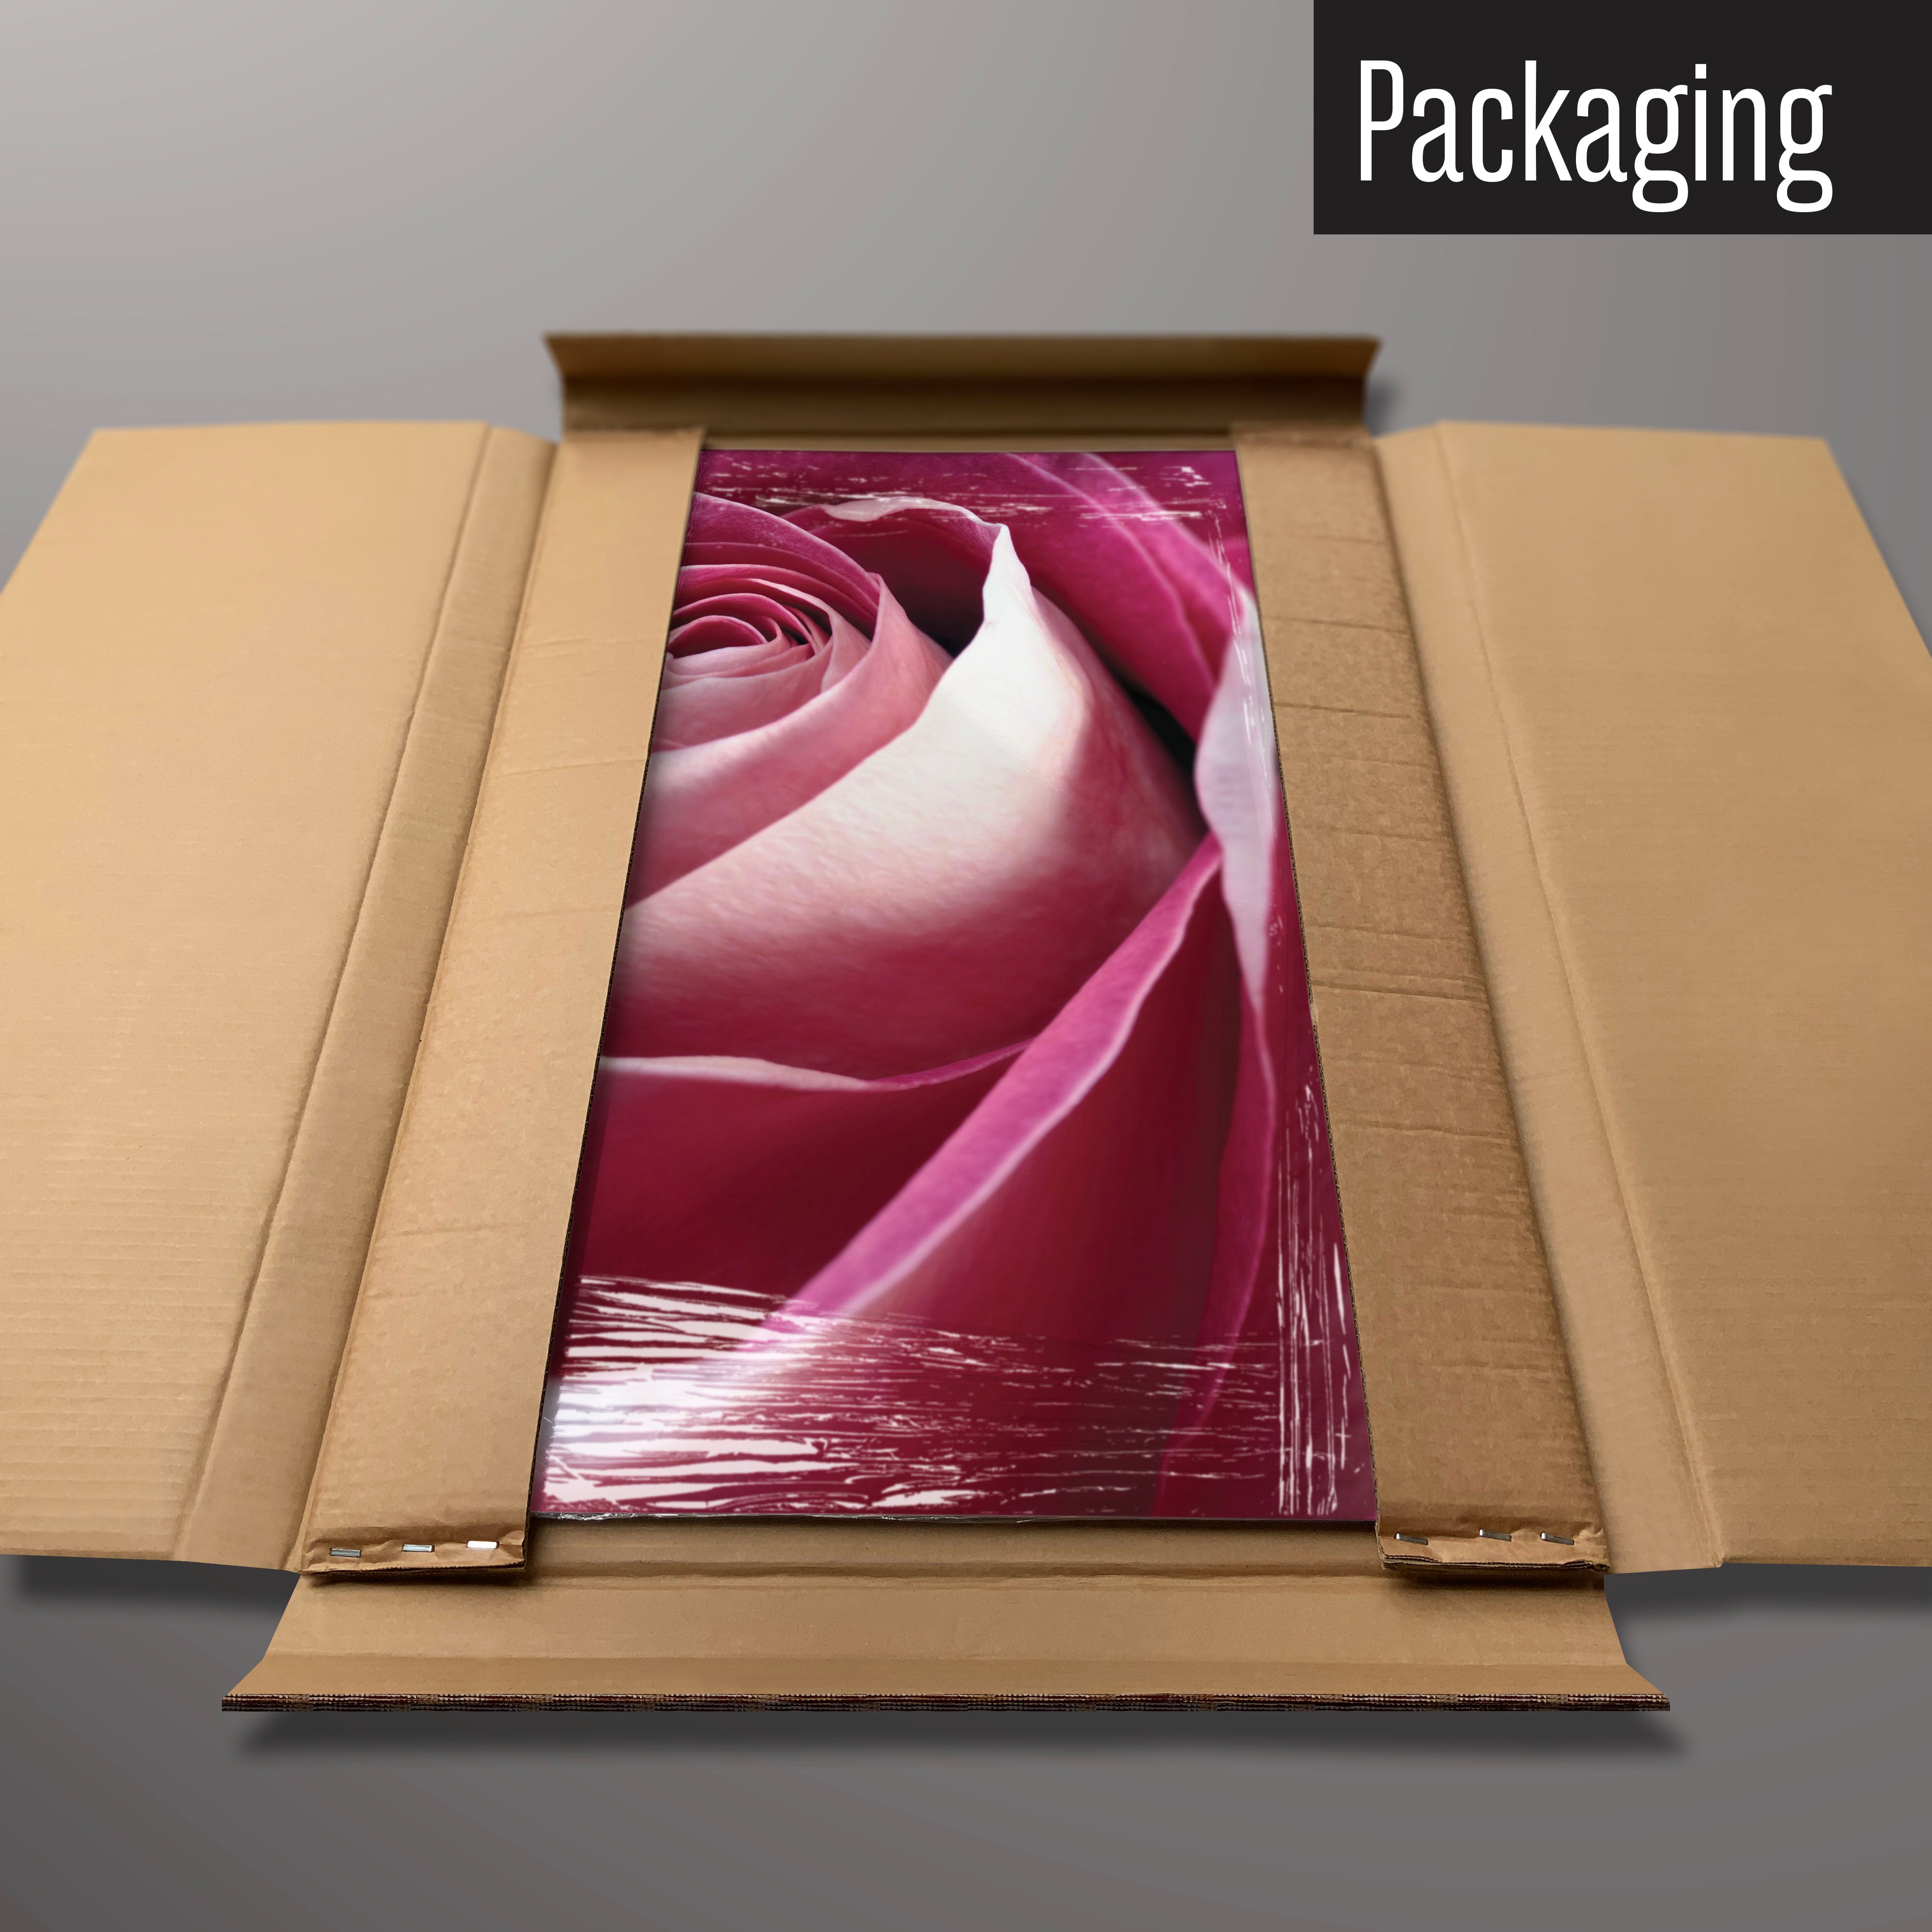 A pink rose photographic magnetic board in it’s cardboard packaging